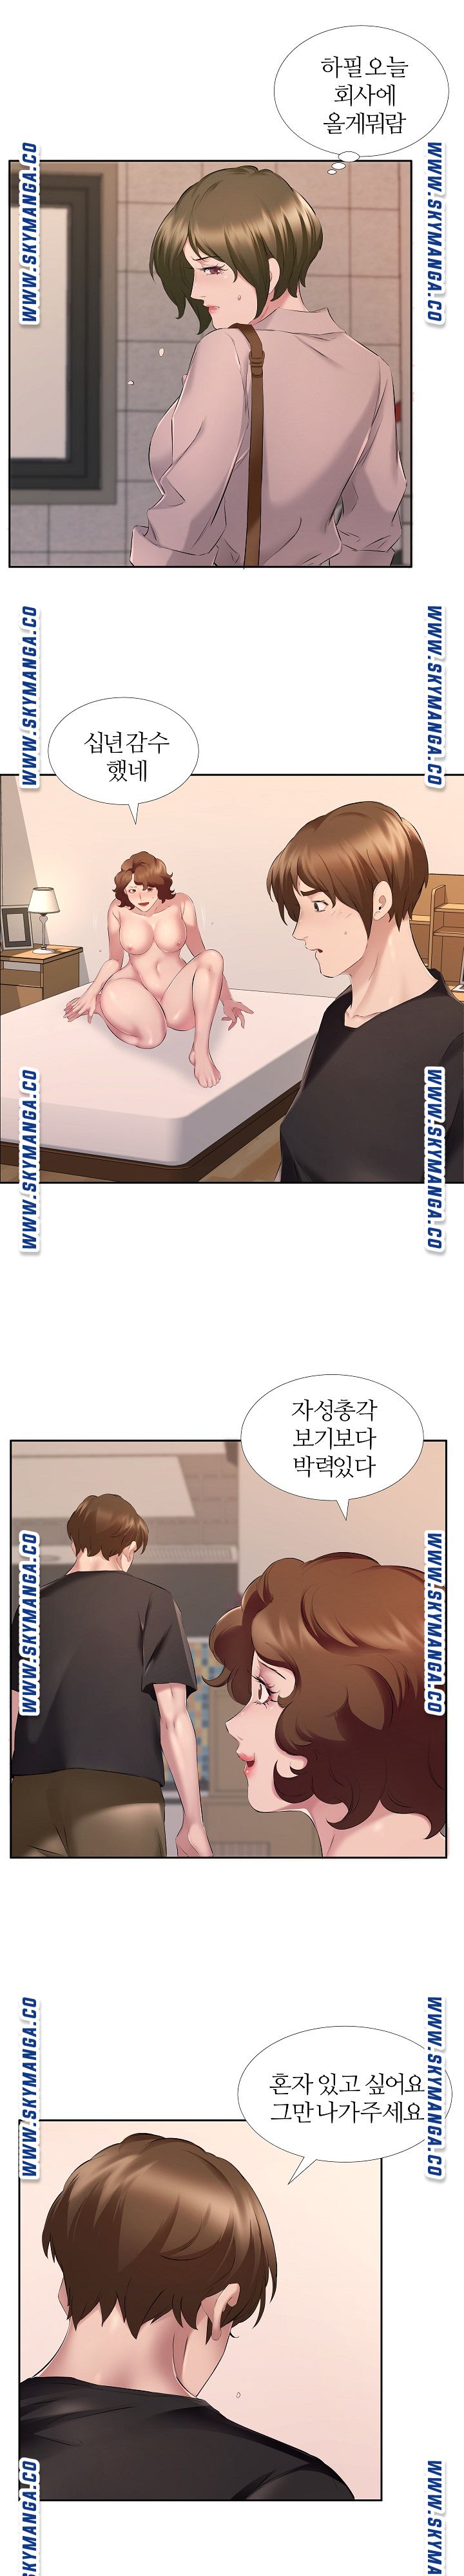 One Room Hotel Raw - Chapter 7 Page 6